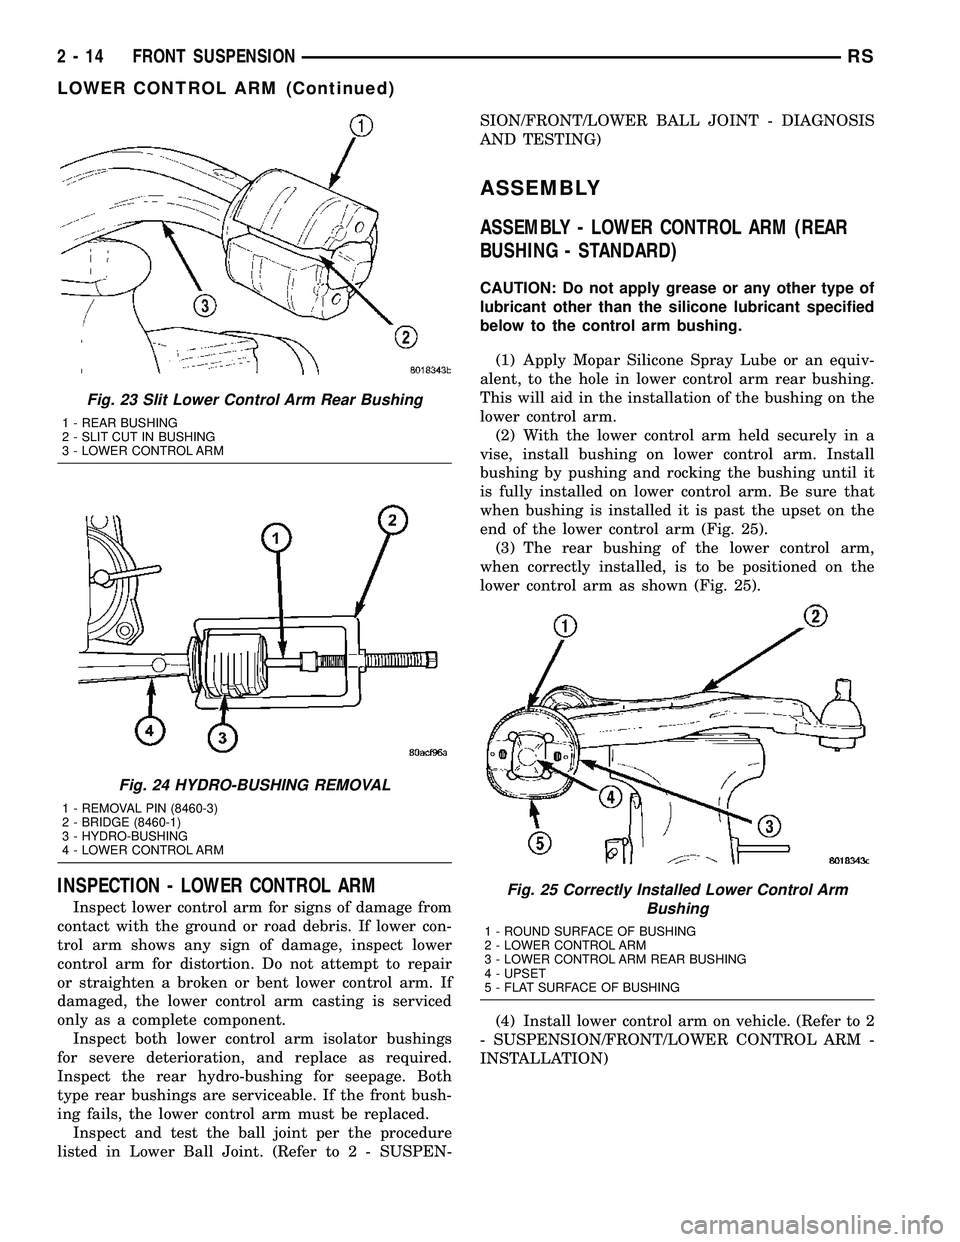 CHRYSLER VOYAGER 2005  Service Manual INSPECTION - LOWER CONTROL ARM
Inspect lower control arm for signs of damage from
contact with the ground or road debris. If lower con-
trol arm shows any sign of damage, inspect lower
control arm for